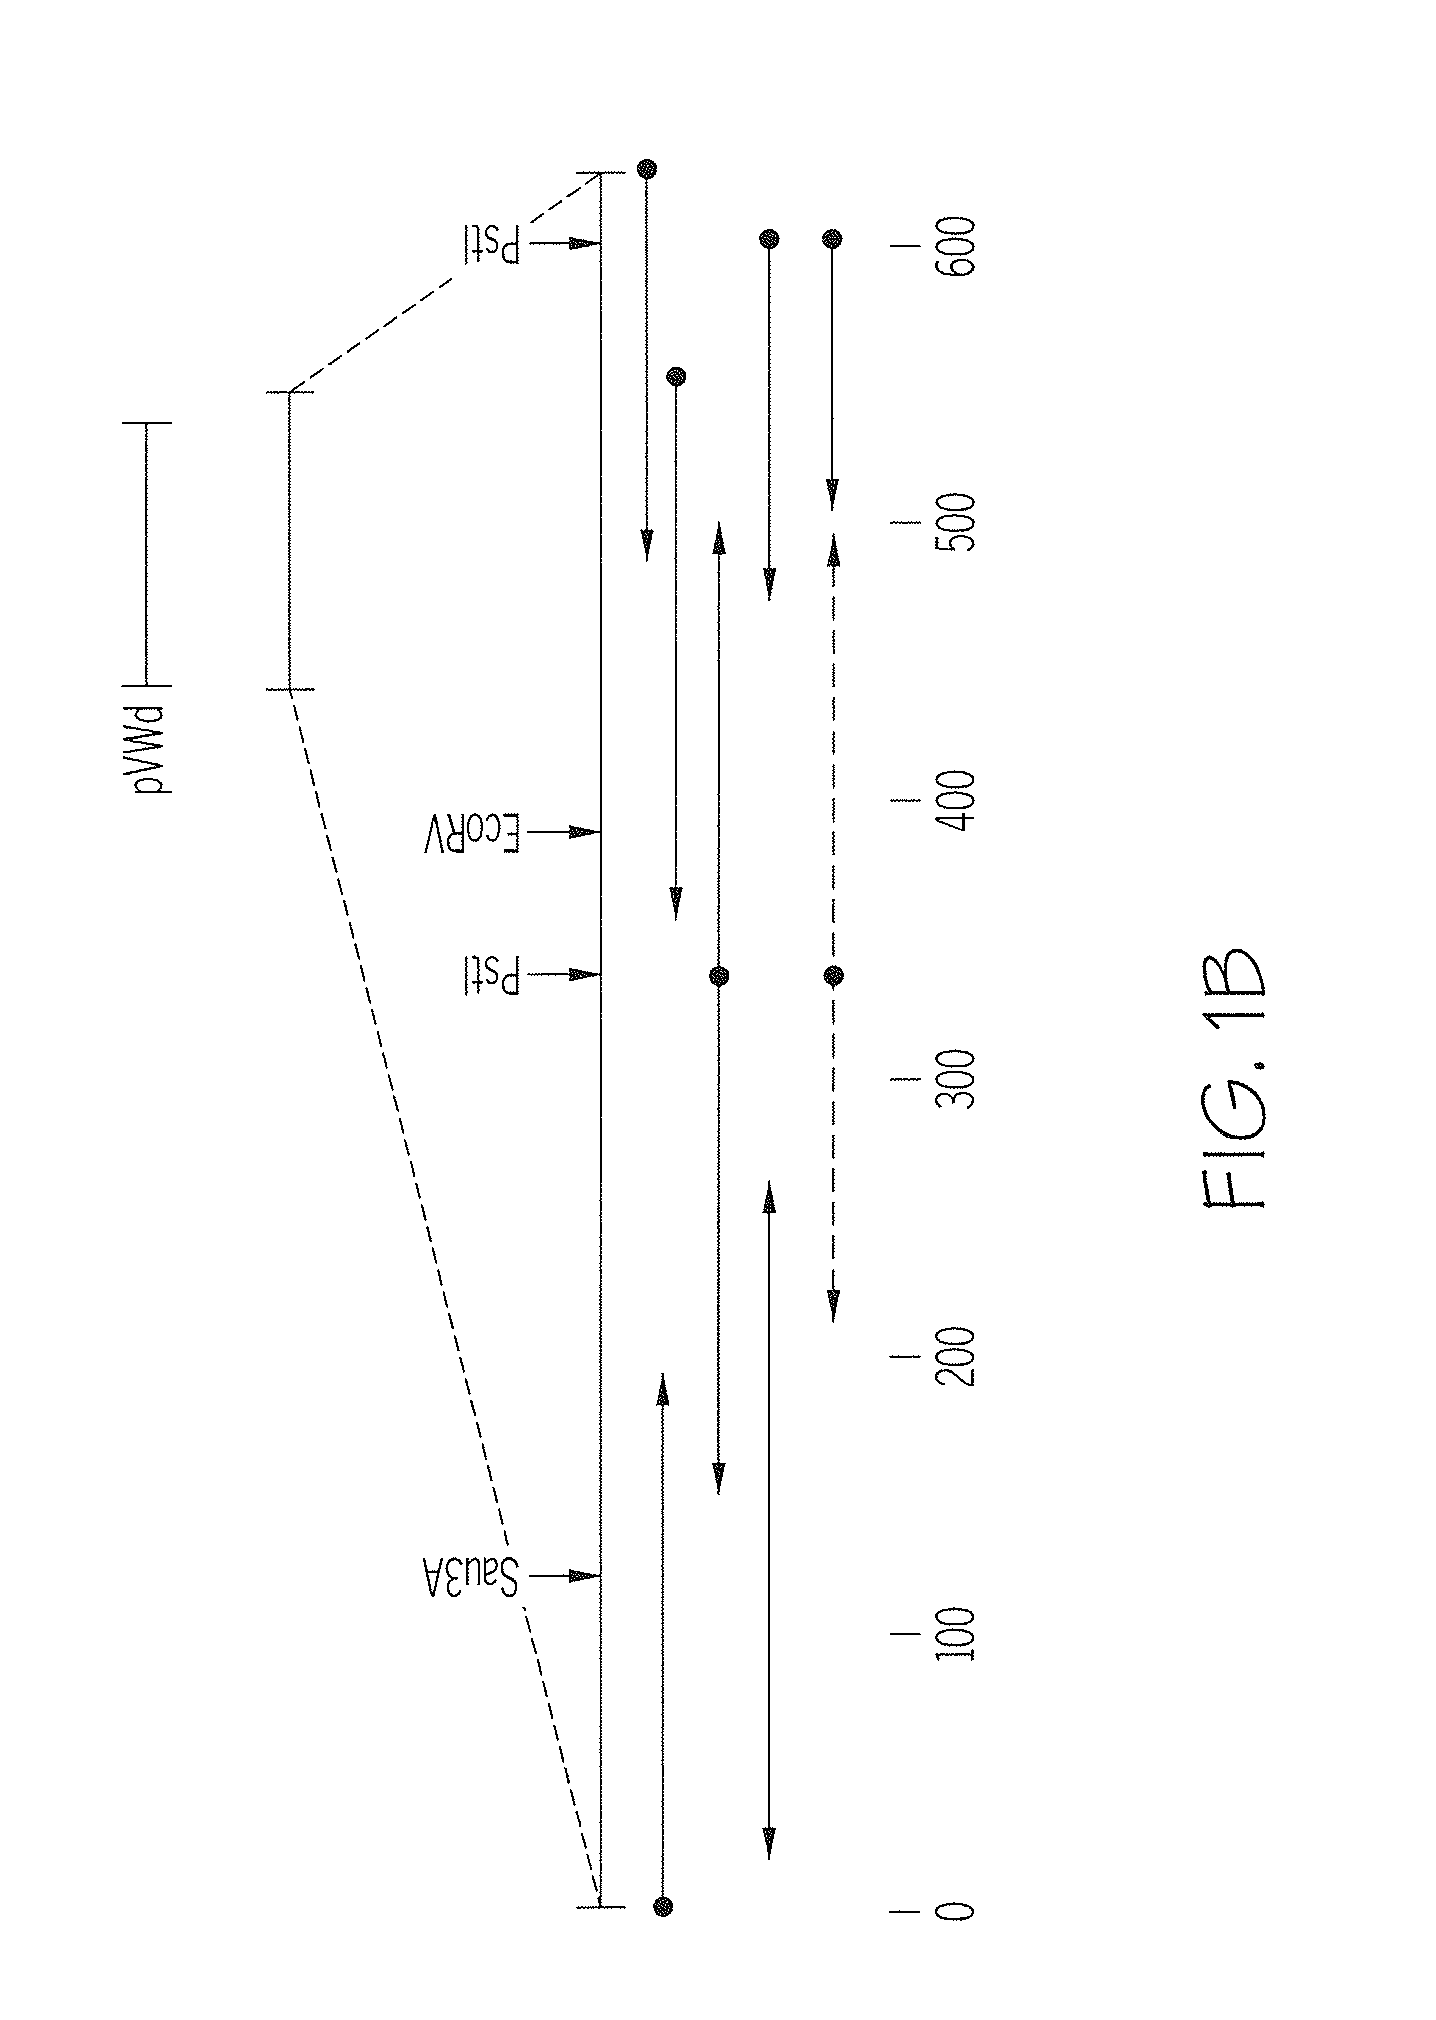 DNA encoding Von Willebrand Factor (VWF) and methods and cells for producing VFW, and VFW produced by the DNA, methods and cells